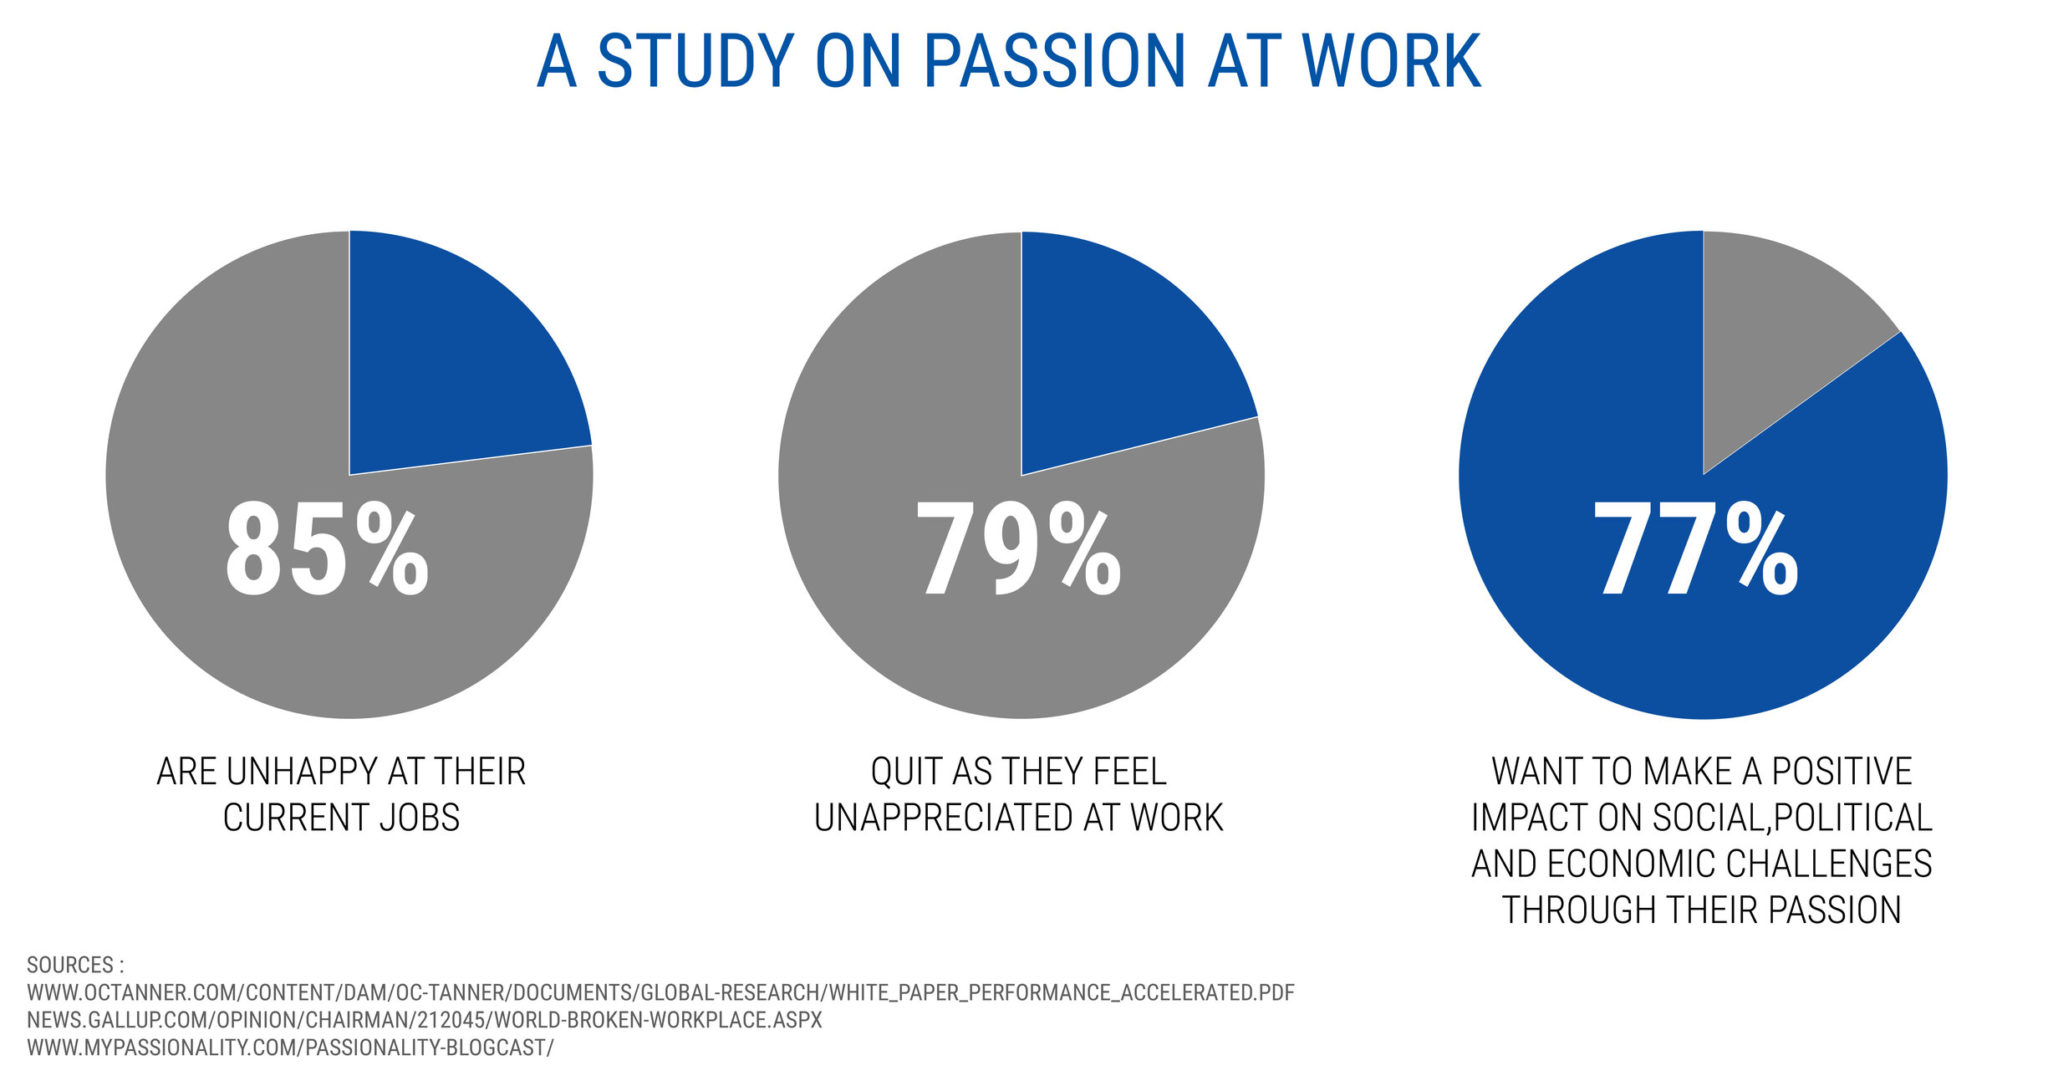 A study on a passion at work - starting a coaching business while working full-time